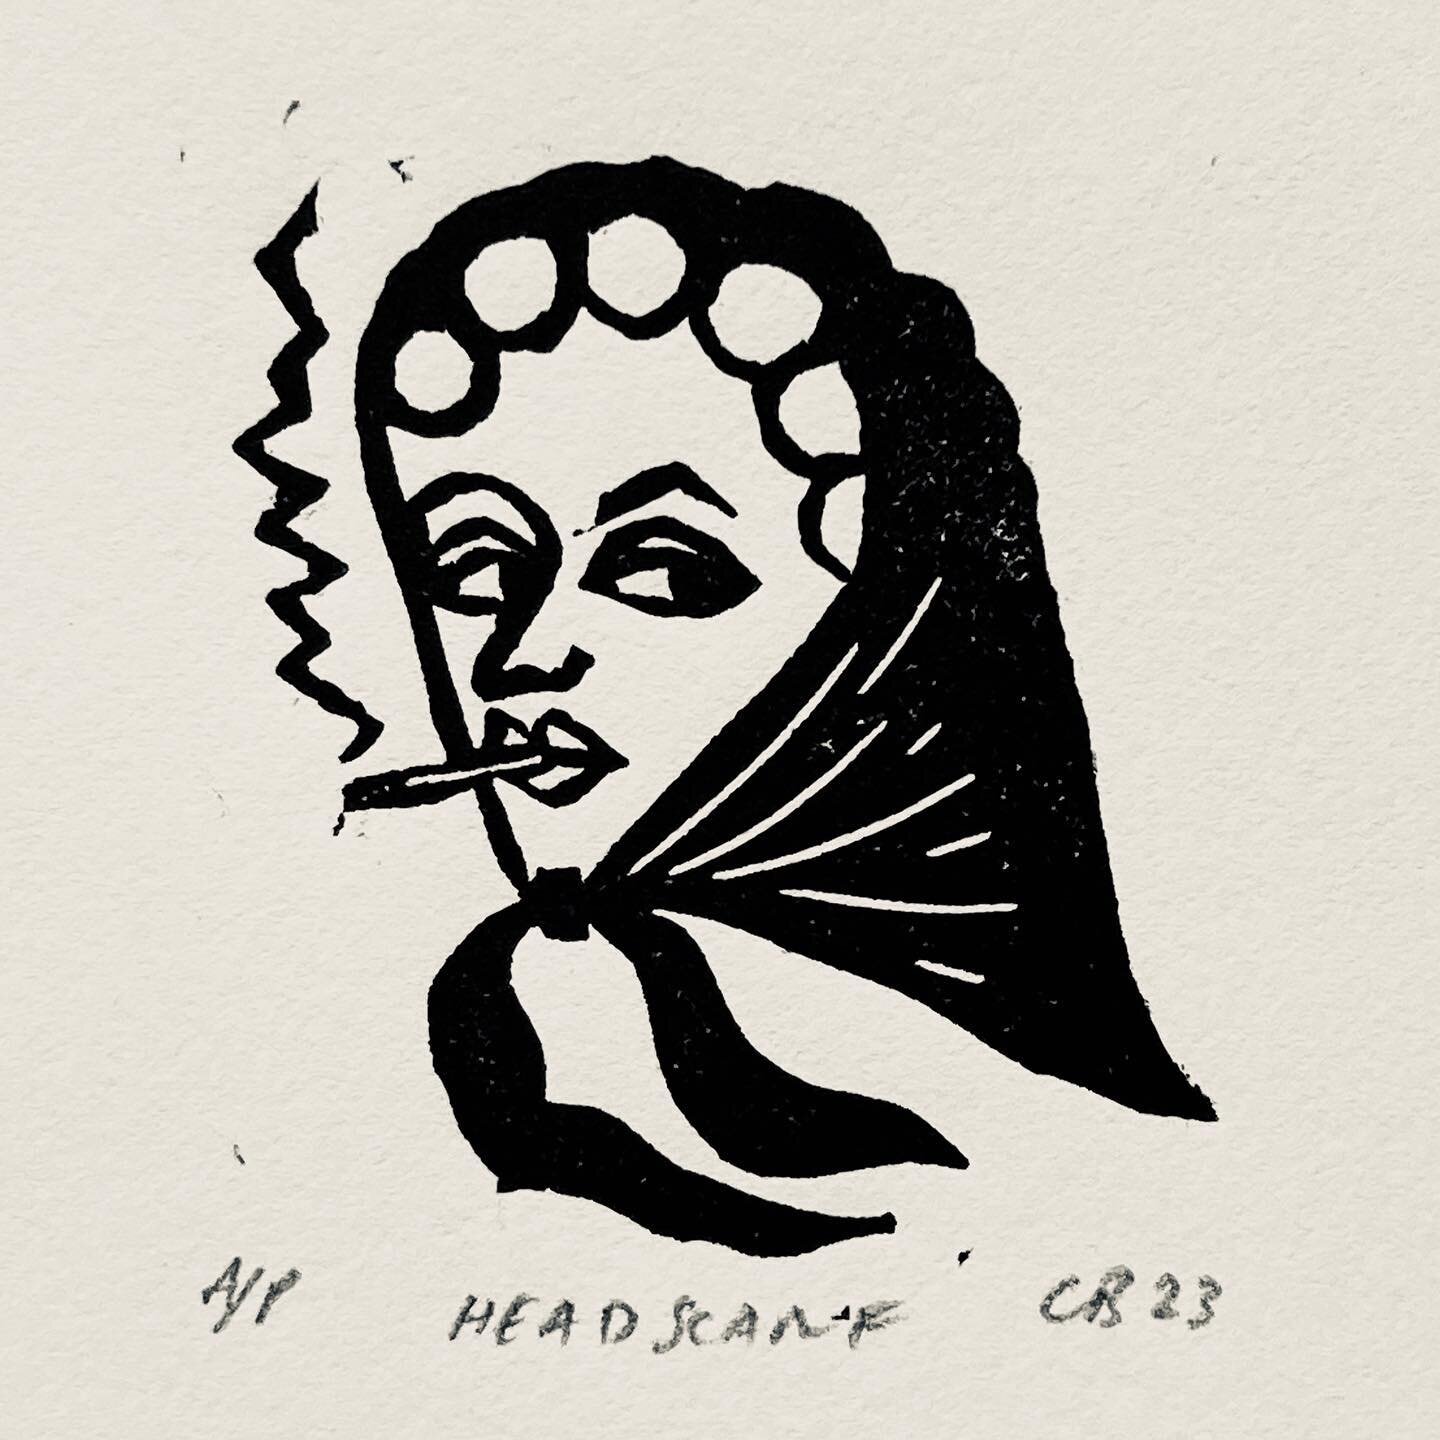 Friday Feeling ! 🚬🫦HEADSCARF 🫦🚬 Linocut by the brilliant @christopherbrownlino . 🚬Image Size: 5 x 5 🚬Paper Size: 9 x 13 🚬Unframed Artists Proof 🚬Available &pound;35.00 including UK postage. 🚬 #headscarf #scarf #headscarfforharmony #headscarf